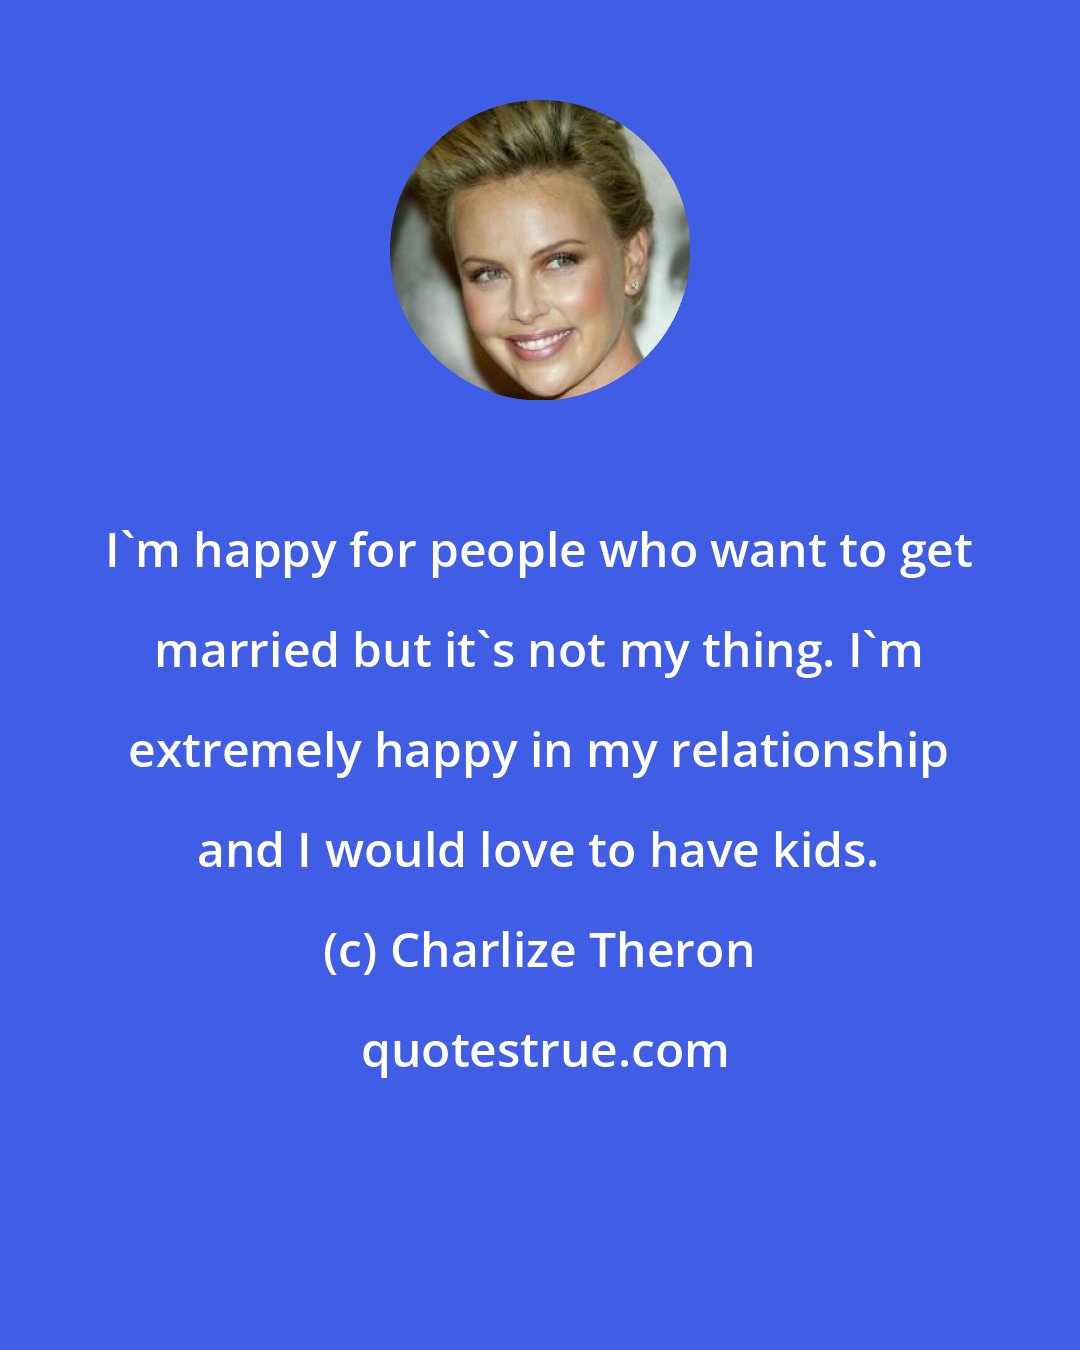 Charlize Theron: I'm happy for people who want to get married but it's not my thing. I'm extremely happy in my relationship and I would love to have kids.